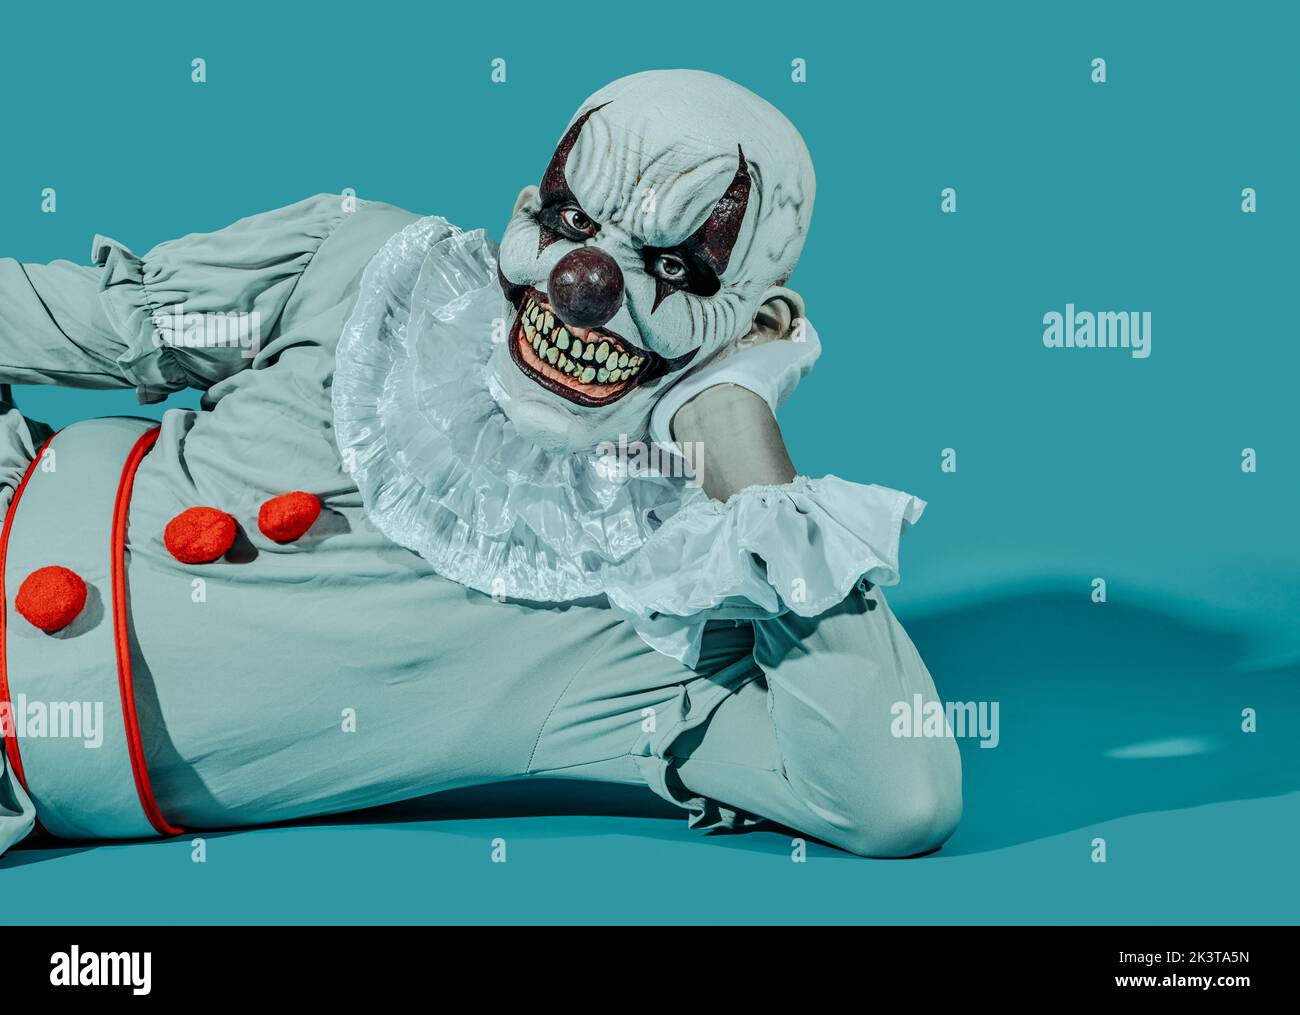 a creepy bald evil clown, with a menacing smile, wearing a gray costume with a white ruff, is lying on his side, leaning on one arm, on a blue backgro Stock Photo